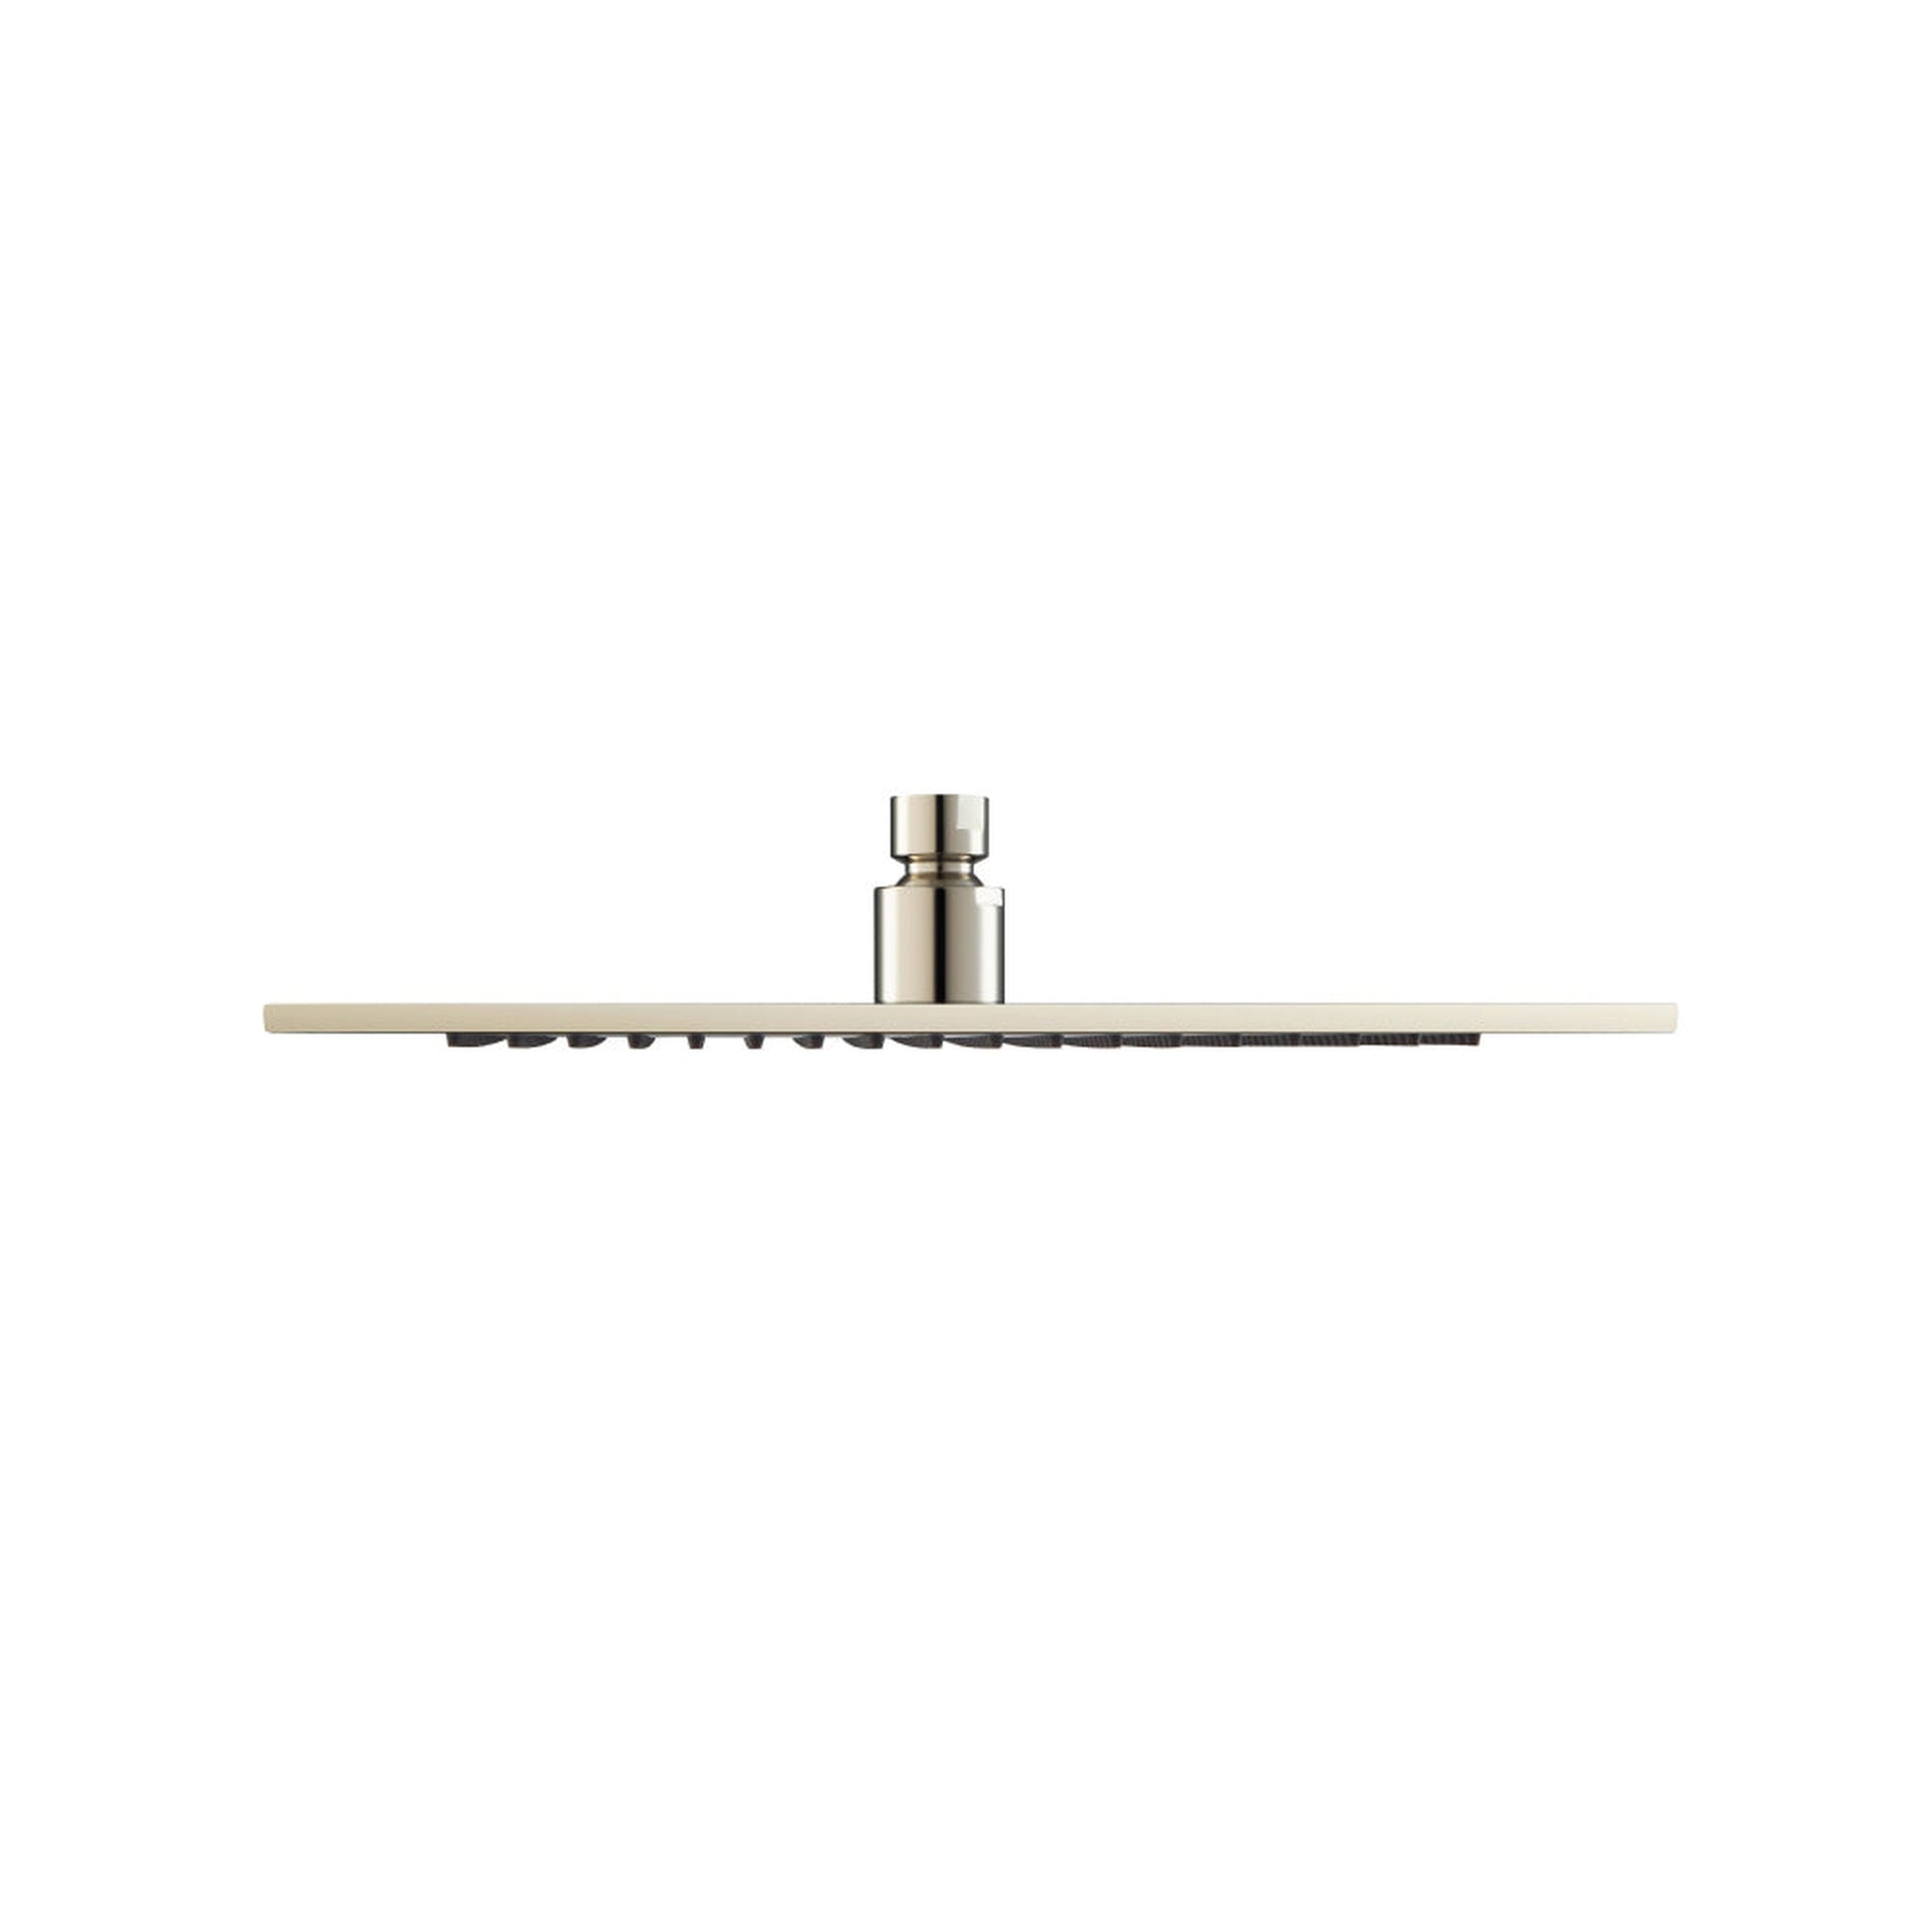 Isenberg Universal Fixtures 12" Single Function Square Polished Nickel PVD Solid Brass Rain Shower Head With 16" Wall Mounted Shower Arm and Adjustable Flange